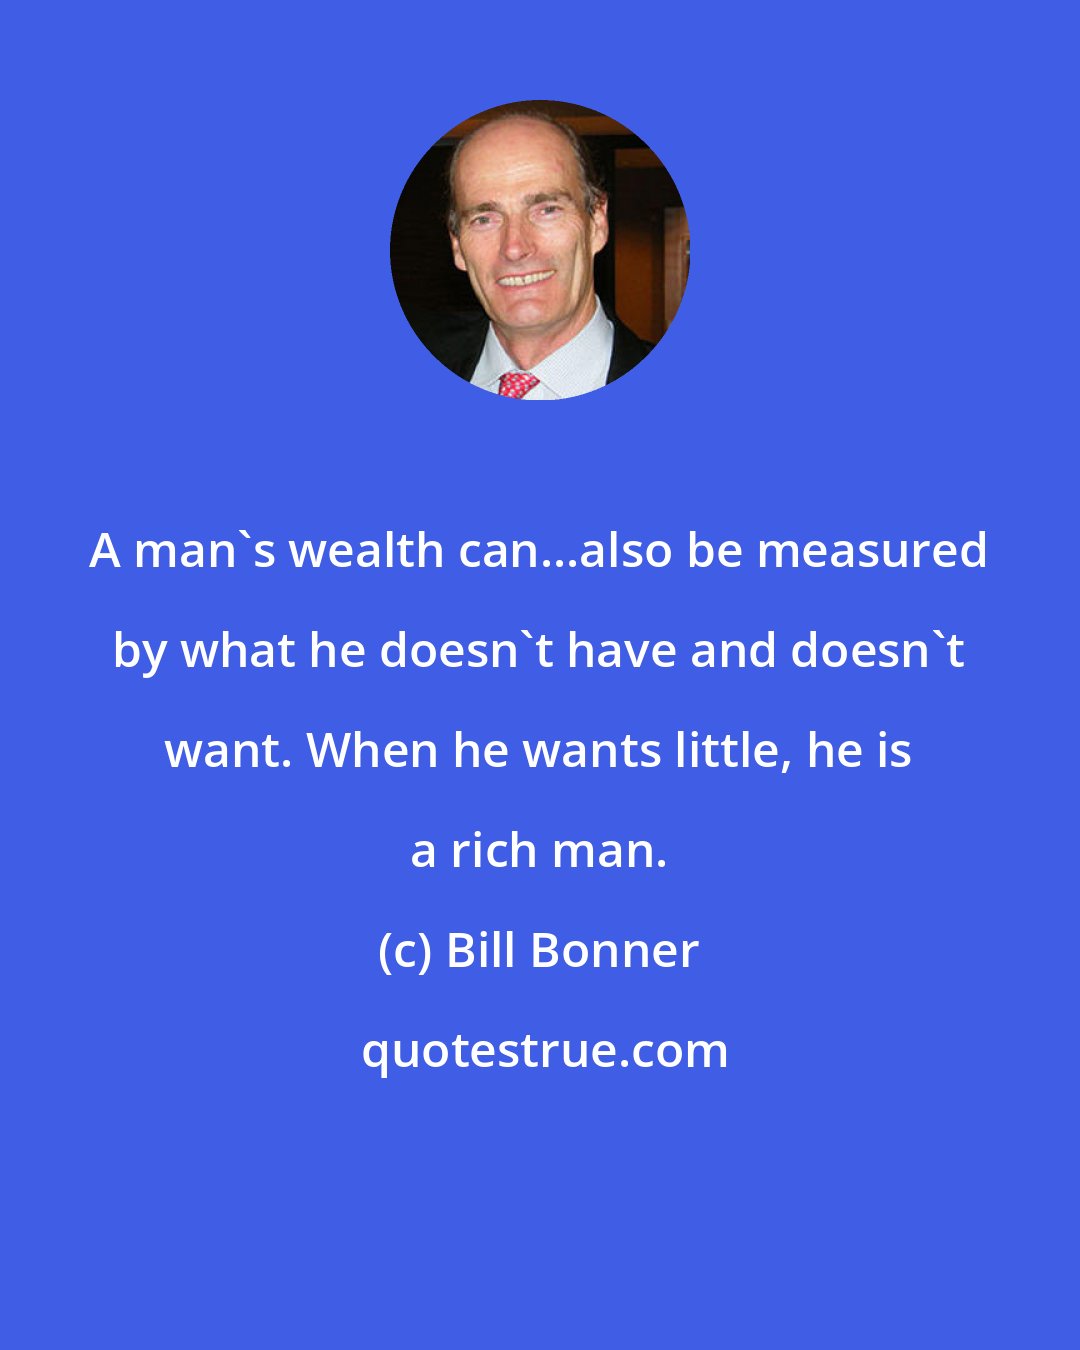 Bill Bonner: A man's wealth can...also be measured by what he doesn't have and doesn't want. When he wants little, he is a rich man.